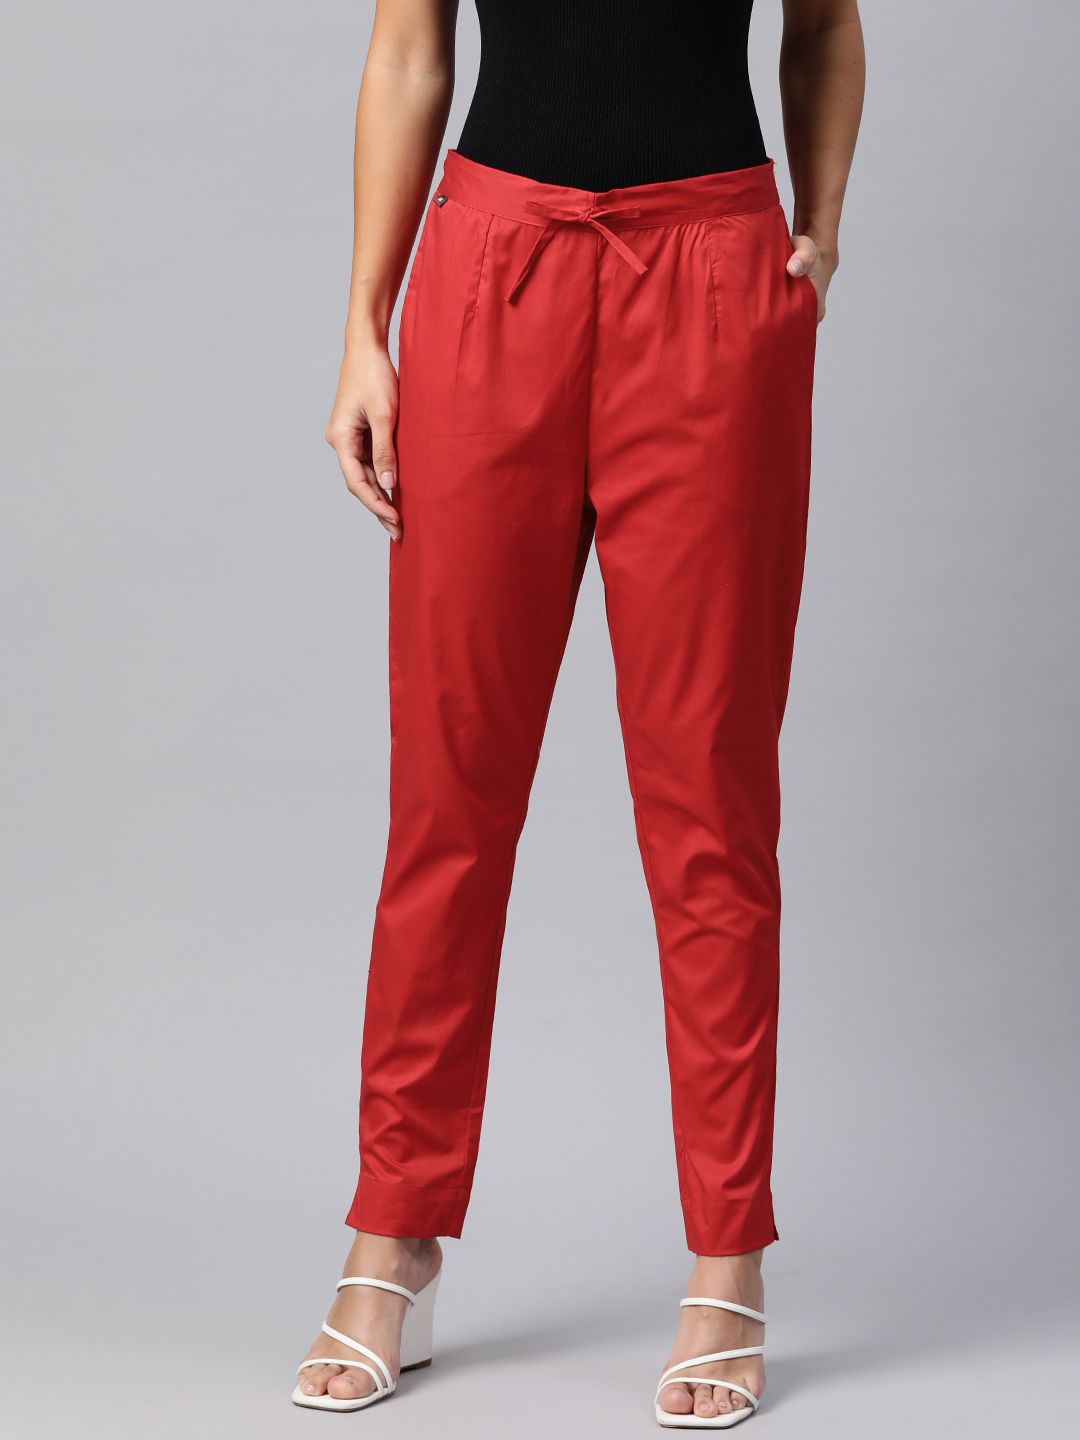 Readiprint Fashions Slim Fit Cigarette Trousers Price in India